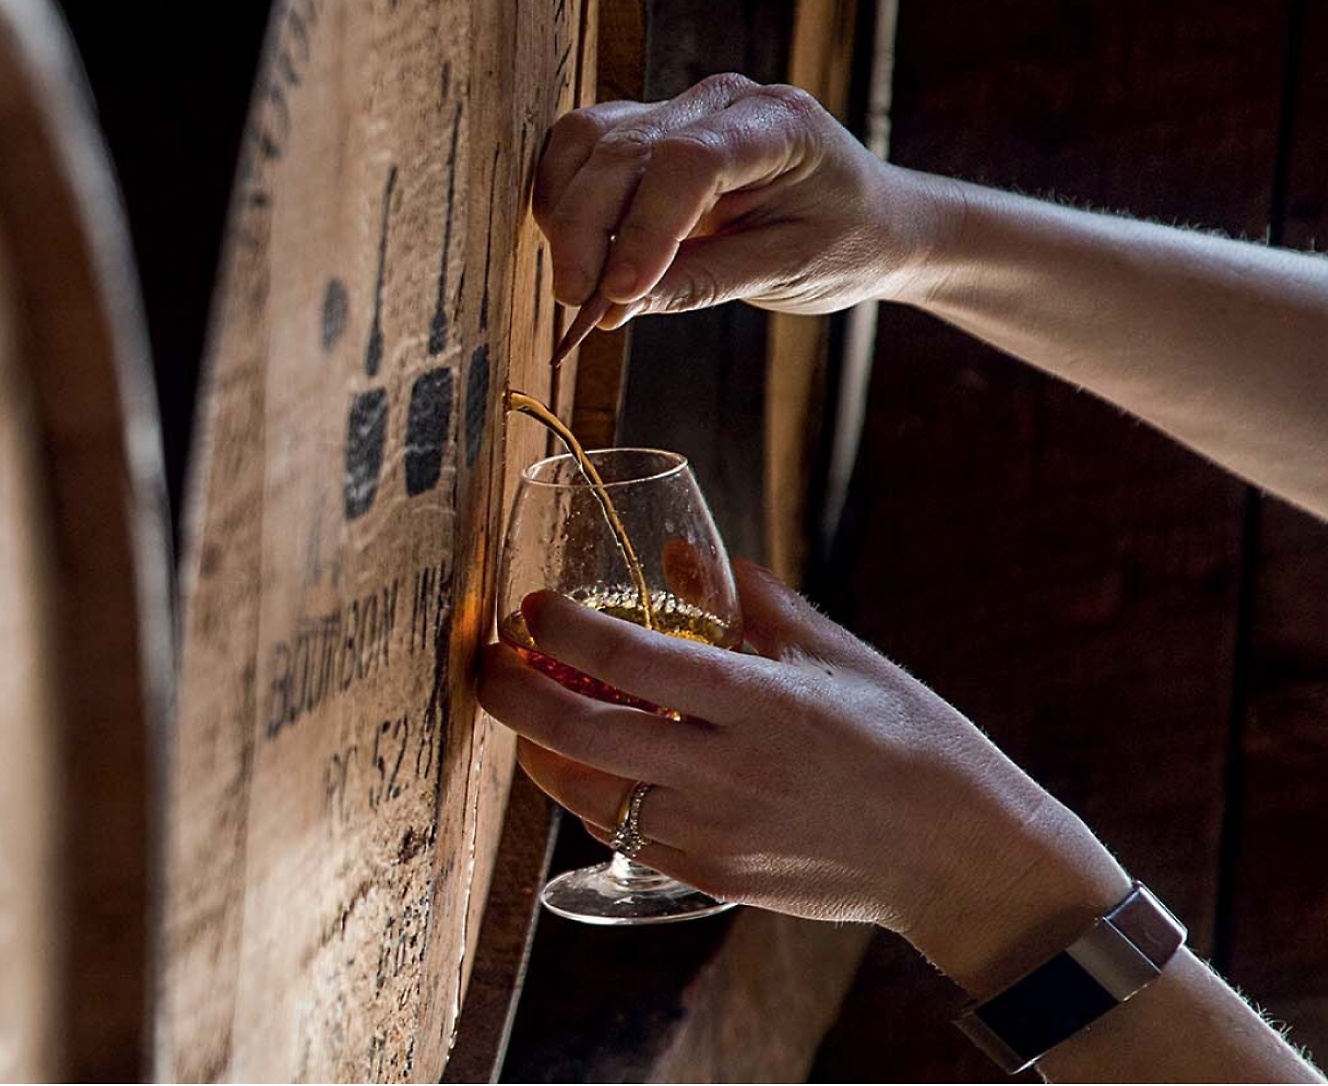 A person pouring a glass of whisky from a barrel.